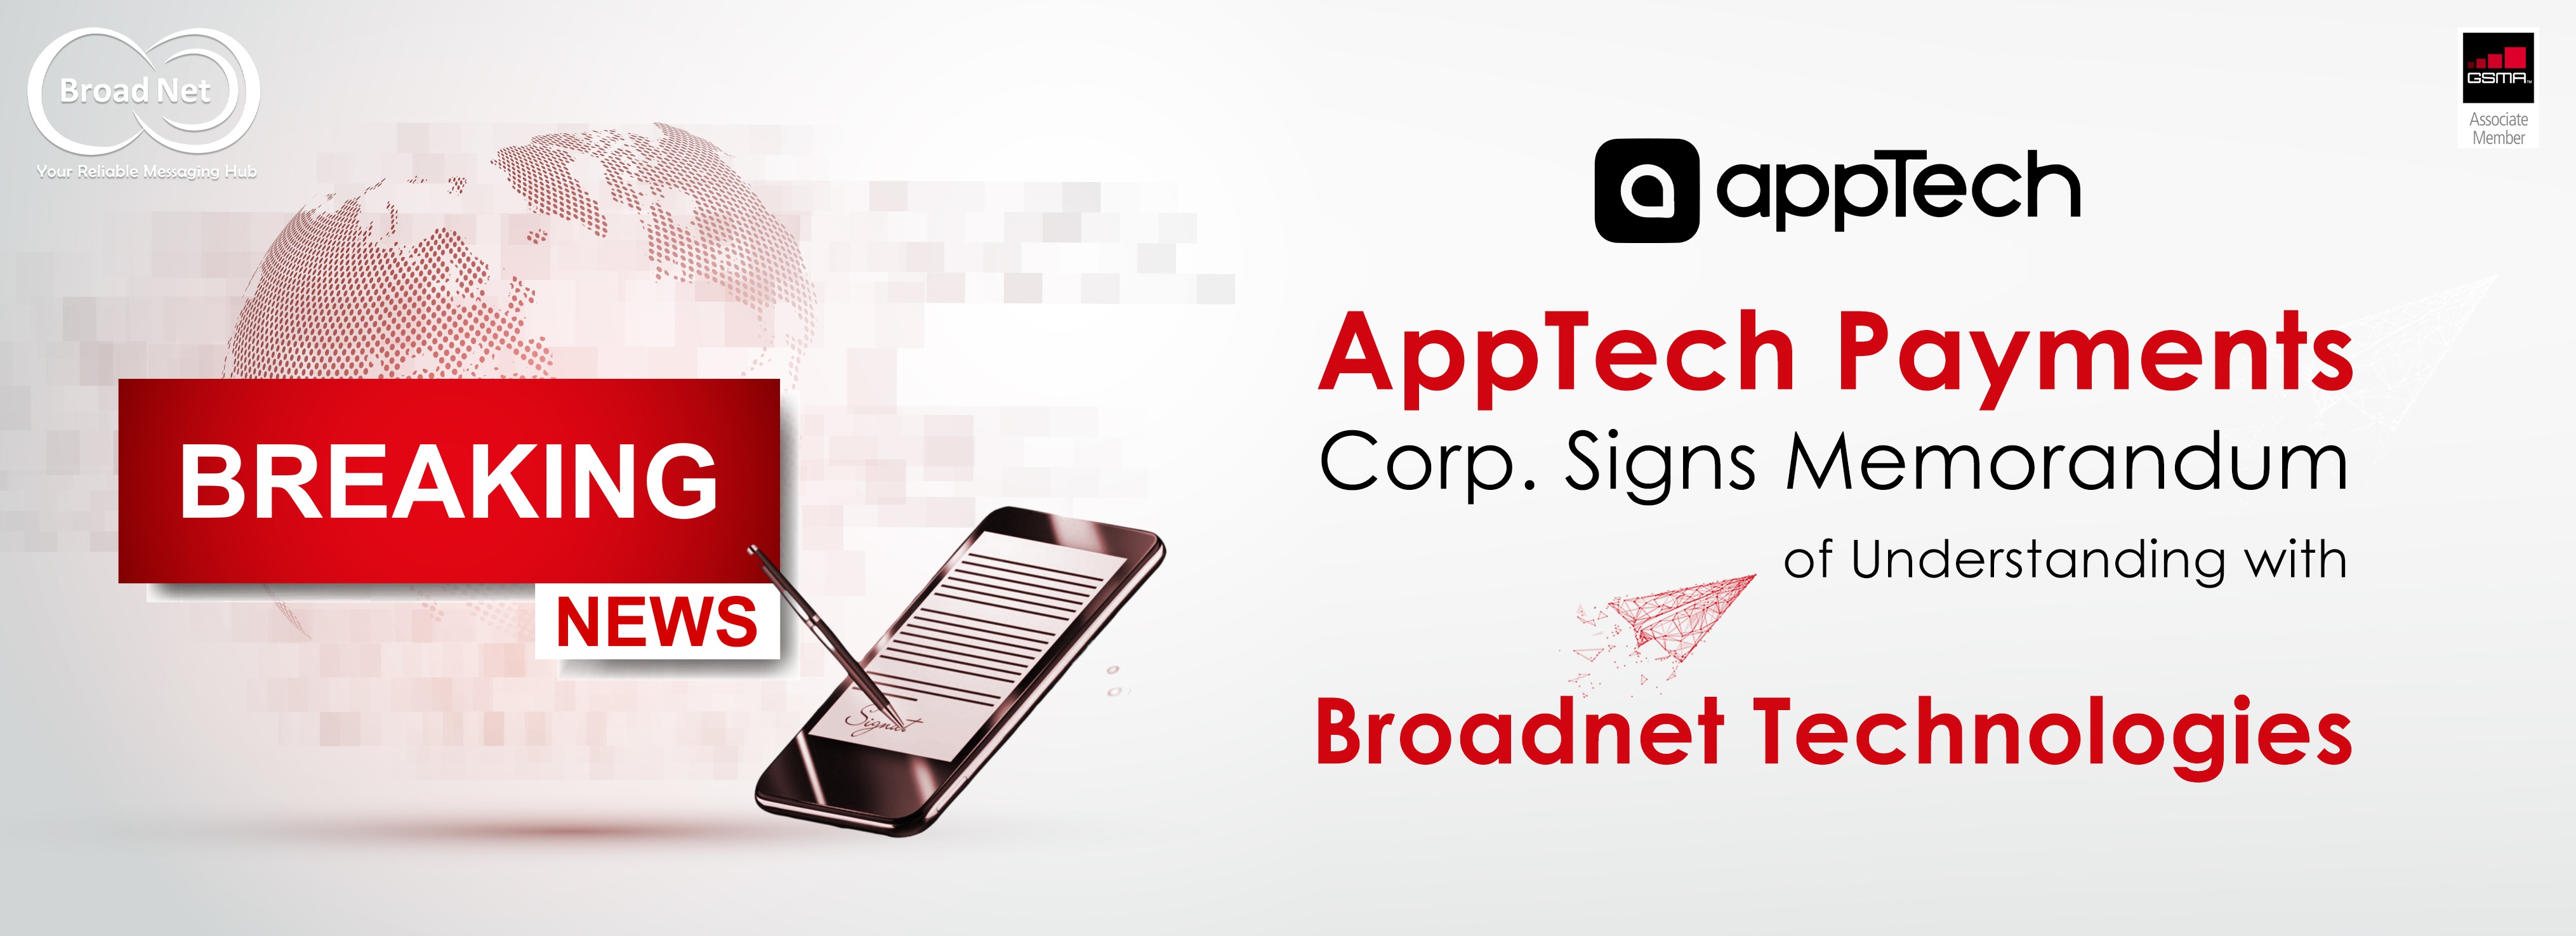 Broadnet Technologies Partners with AppTech Payments Corp. to Revolutionize Digital Payment and Banking Experience with Advanced SMS Solutions